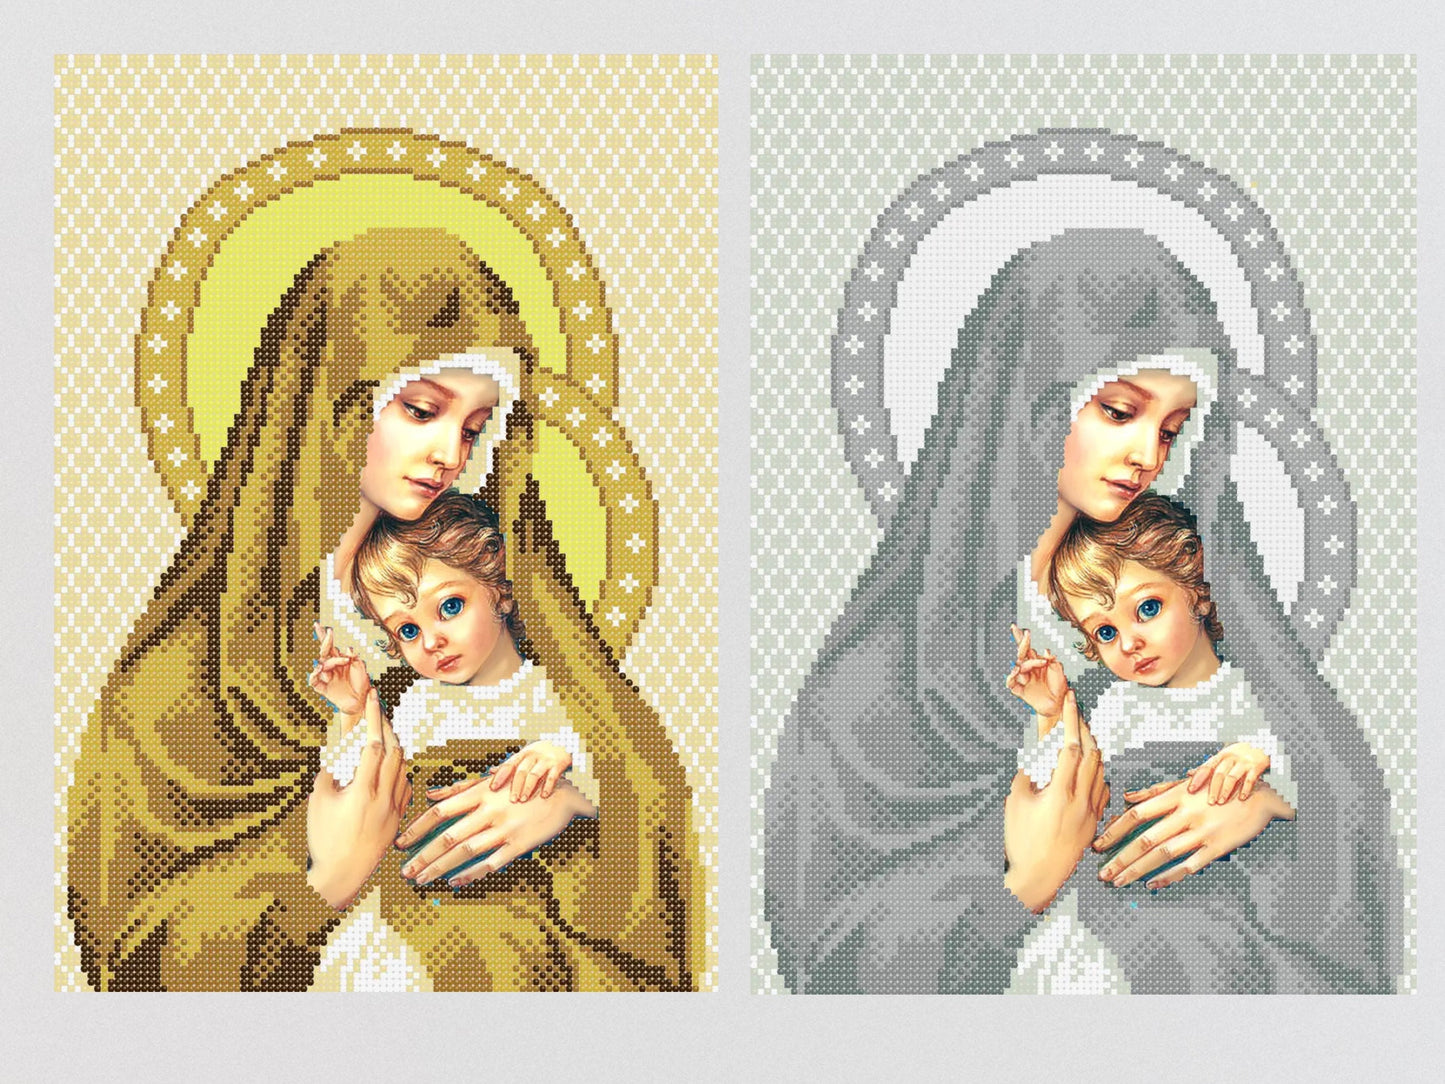 DIY Bead embroidery kit  "Holy Madonna and Child". Size: 8.7 - 12.2 in (22 - 31cm) - VadymShop